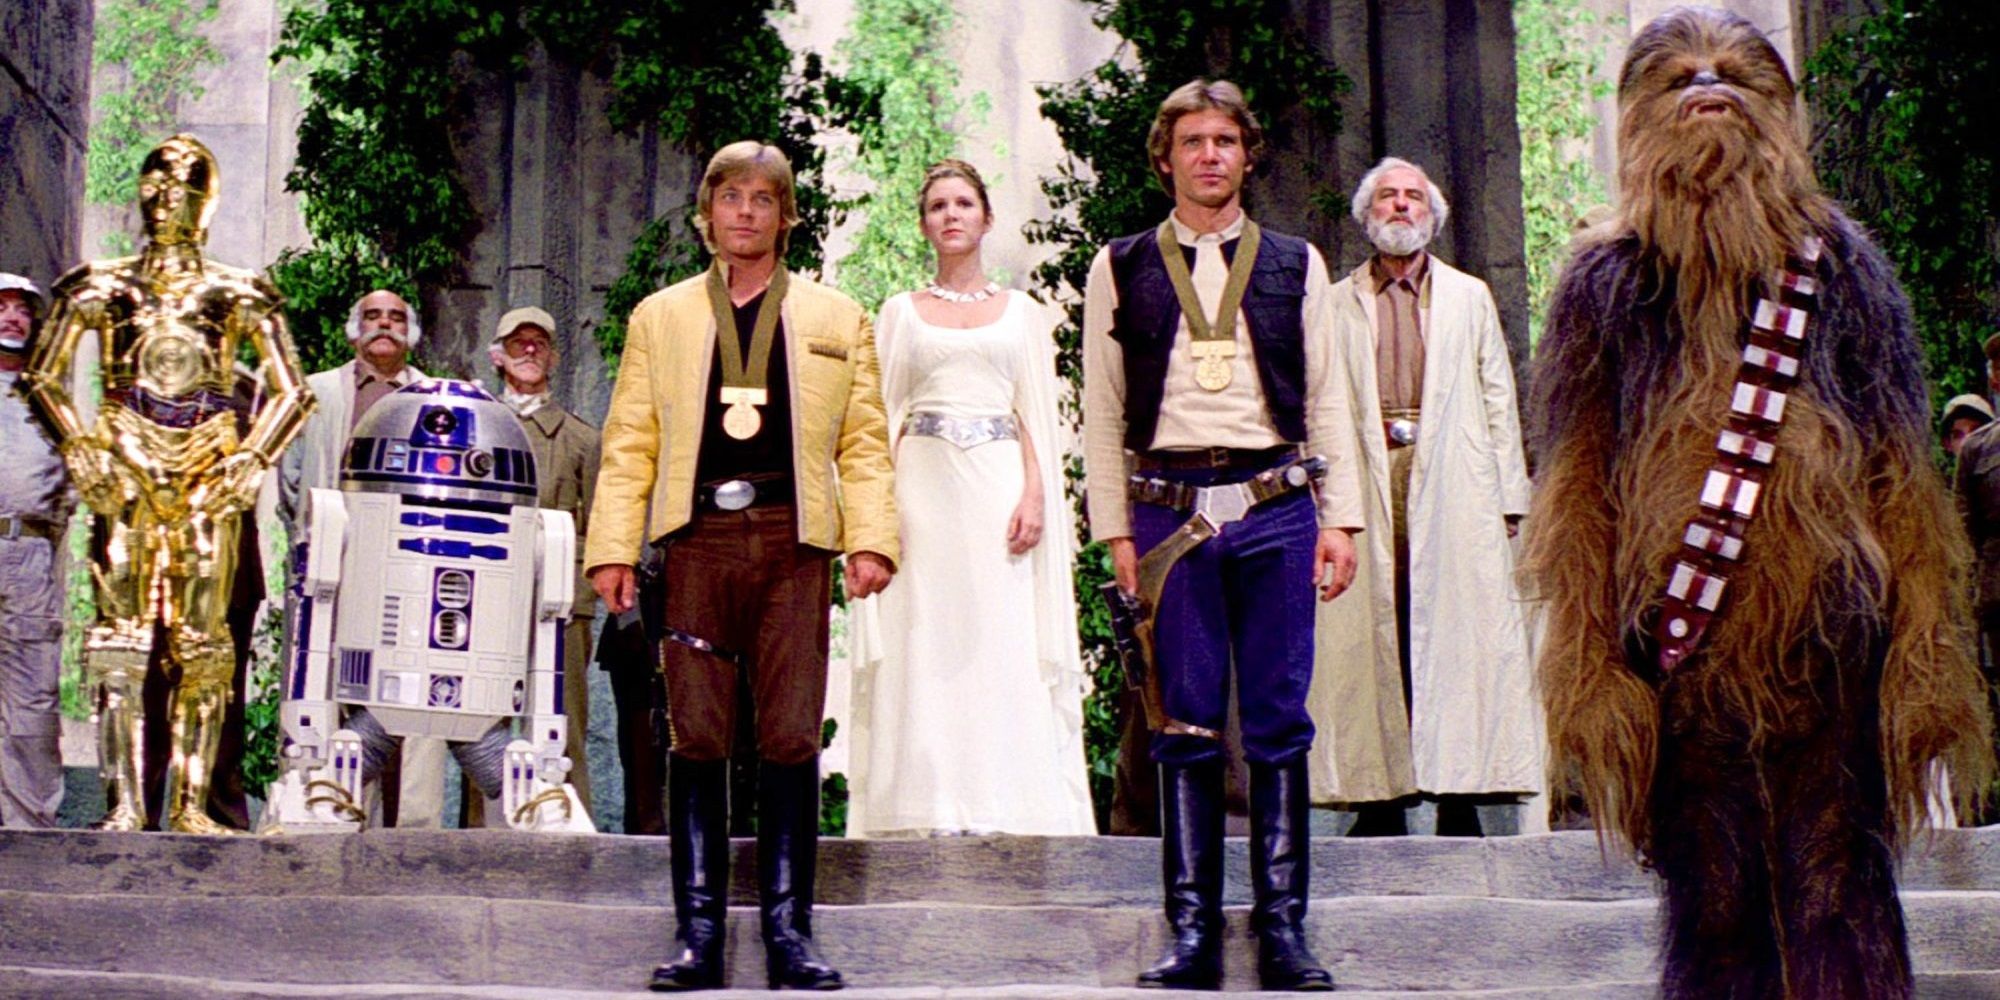 C-3PO, R2-D2, Luke Skywalker, Princess Lei, Han Solo, Chewbacca attend the medal ceremony in Star Wars: A New Hope